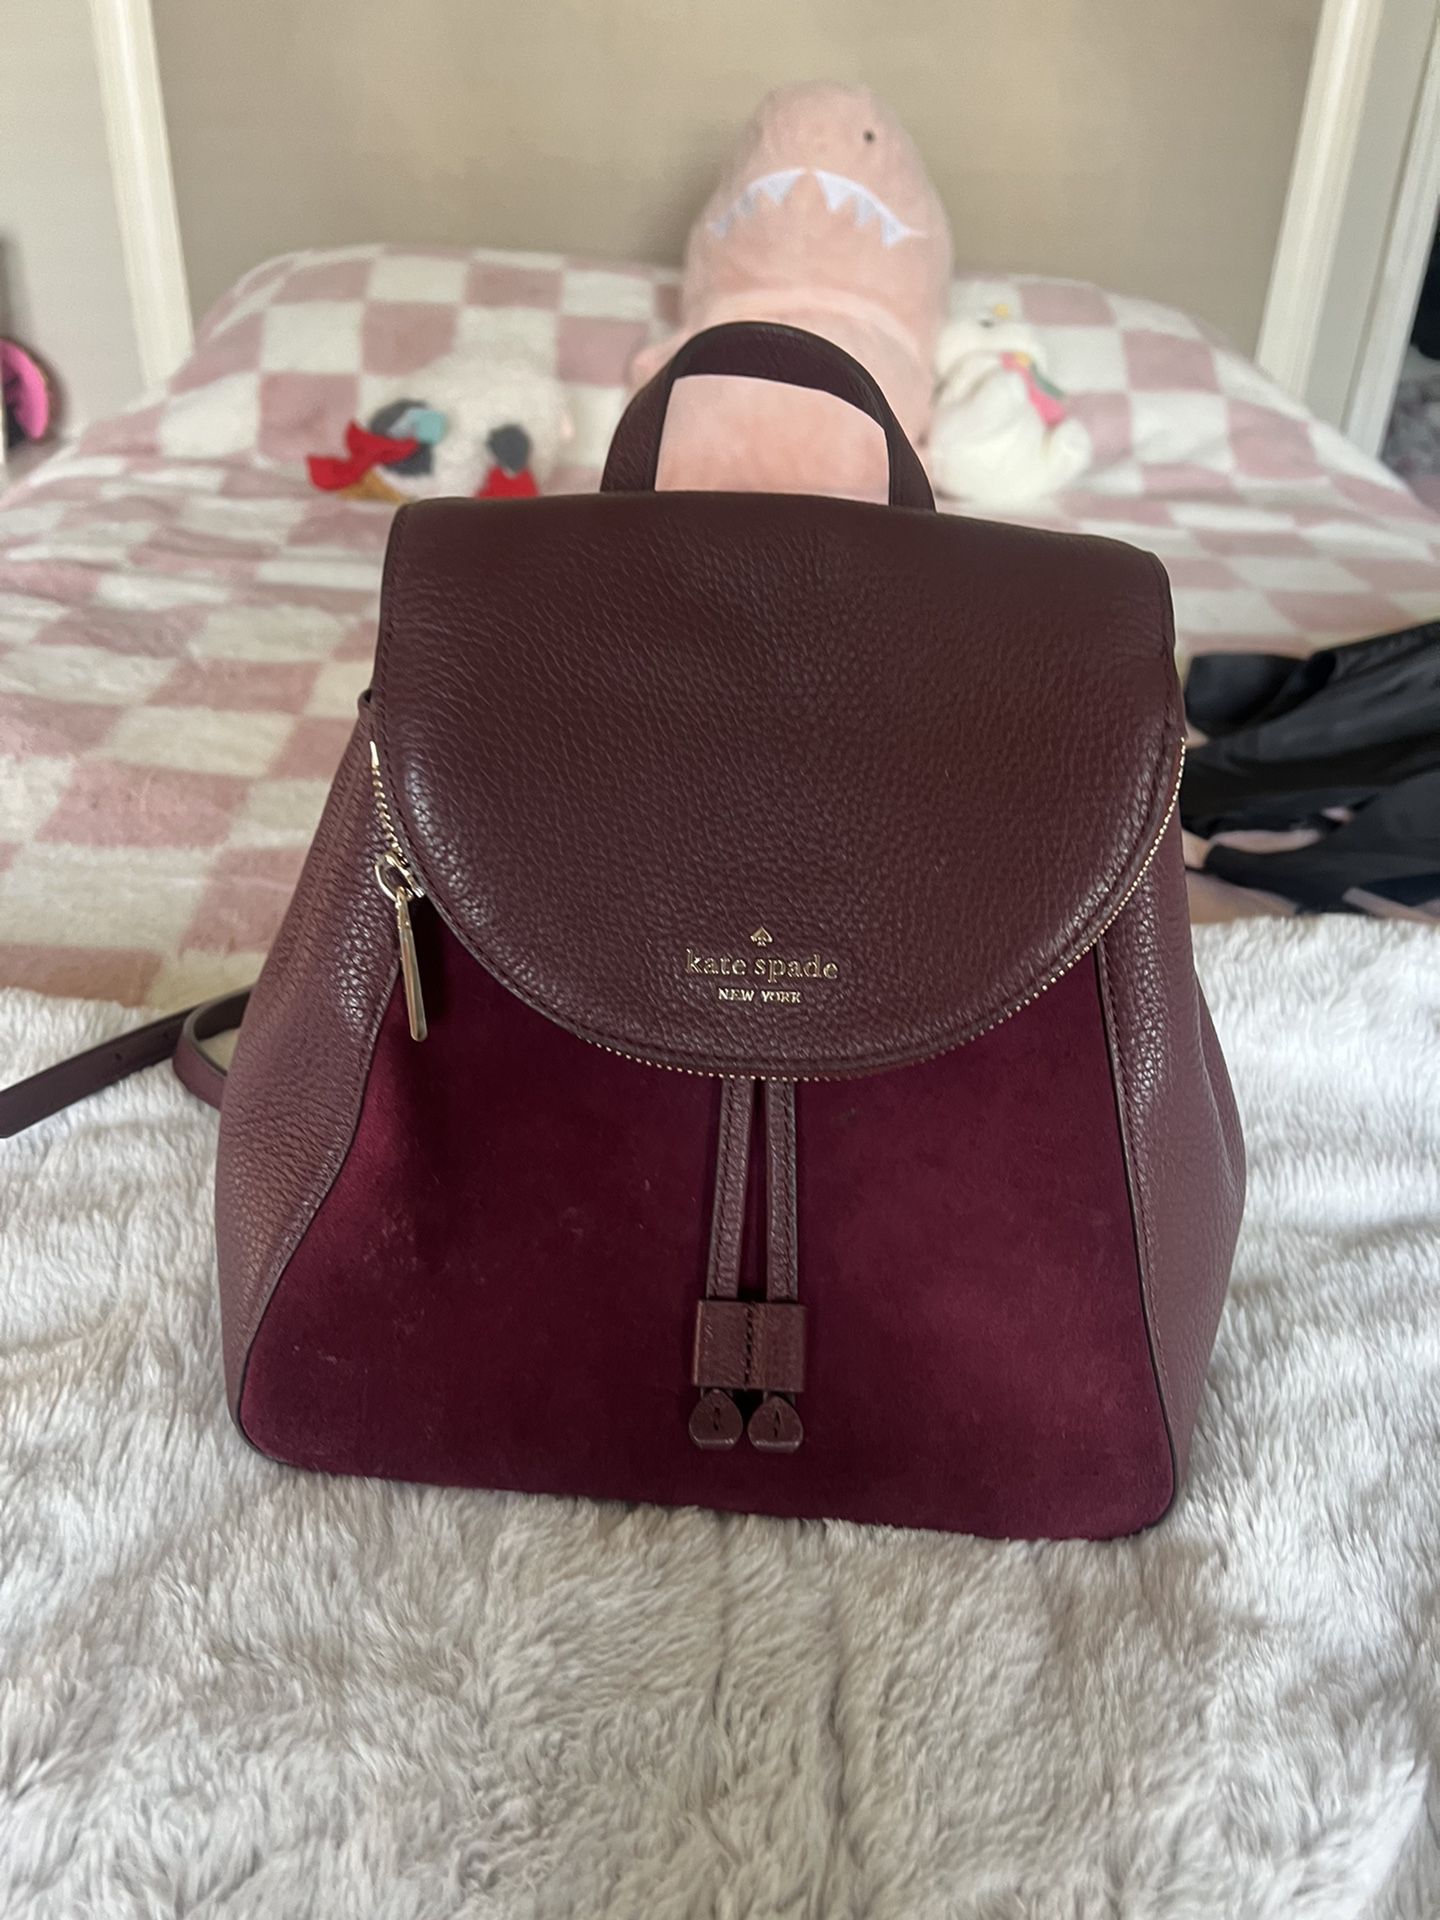 Kate Spade York Grained Leather Bag